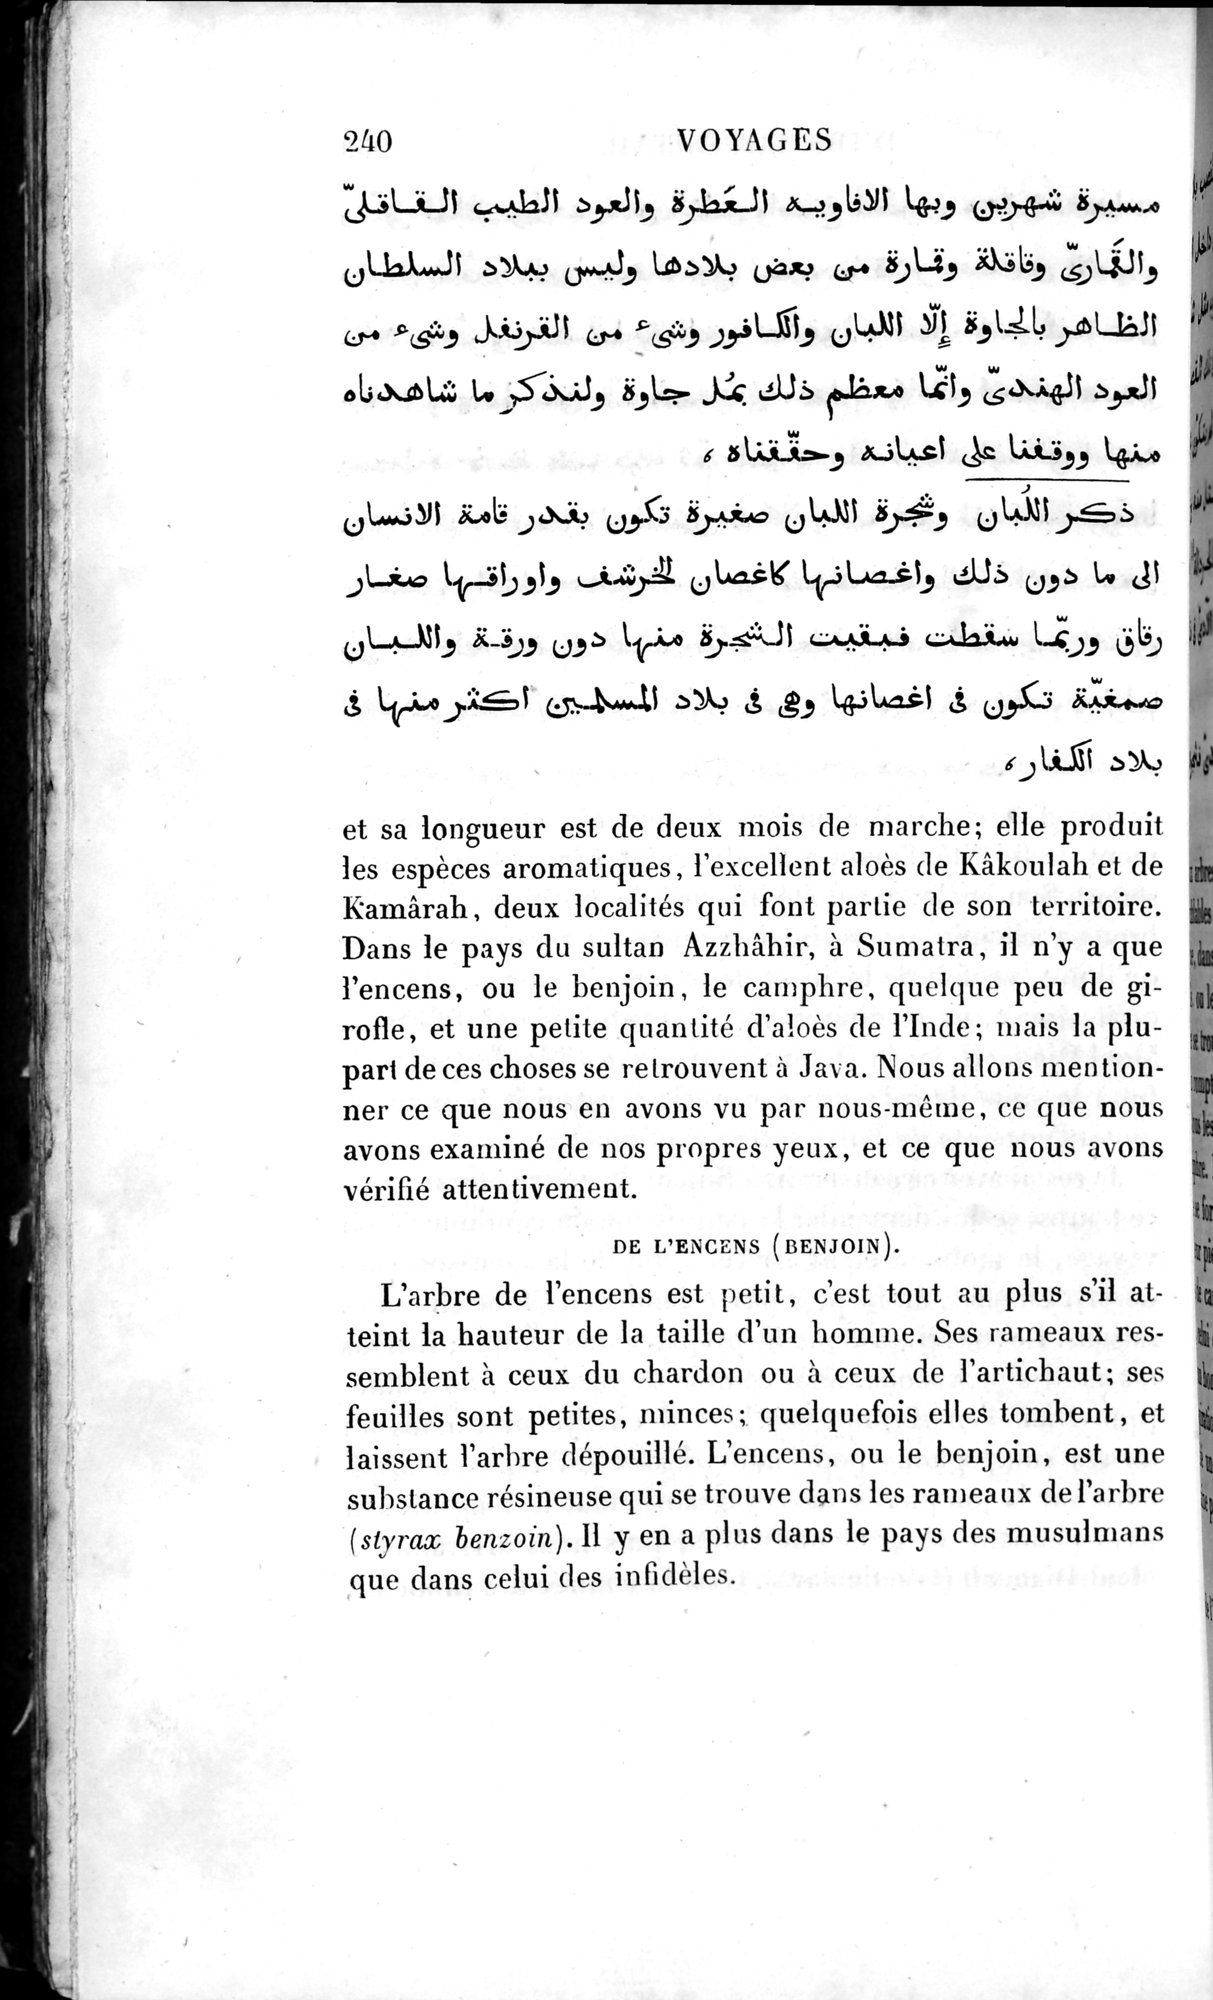 Voyages d'Ibn Batoutah : vol.4 / Page 252 (Grayscale High Resolution Image)